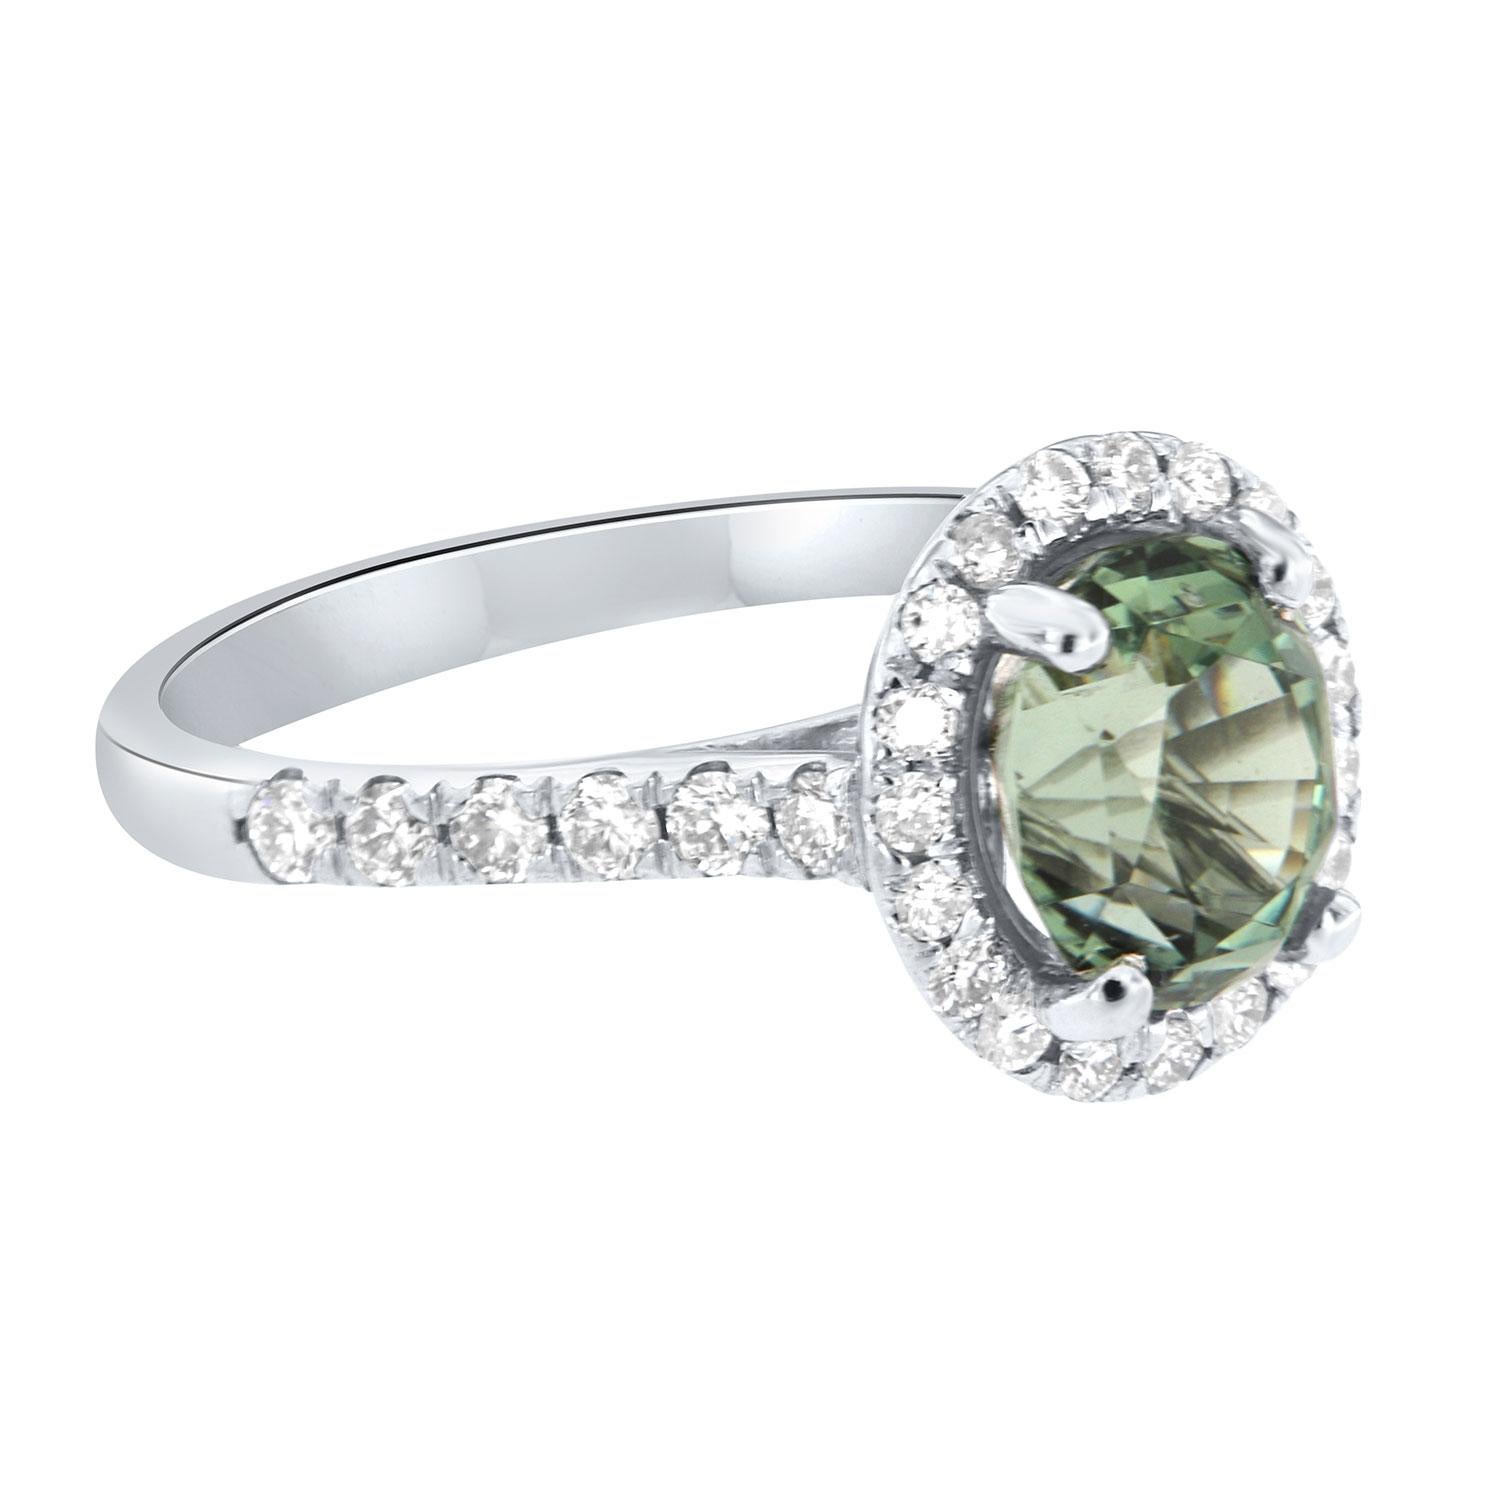 Oval Cut 14K White Gold 2.47 Carat Oval Green Tourmaline Halo Diamond Ring For Sale